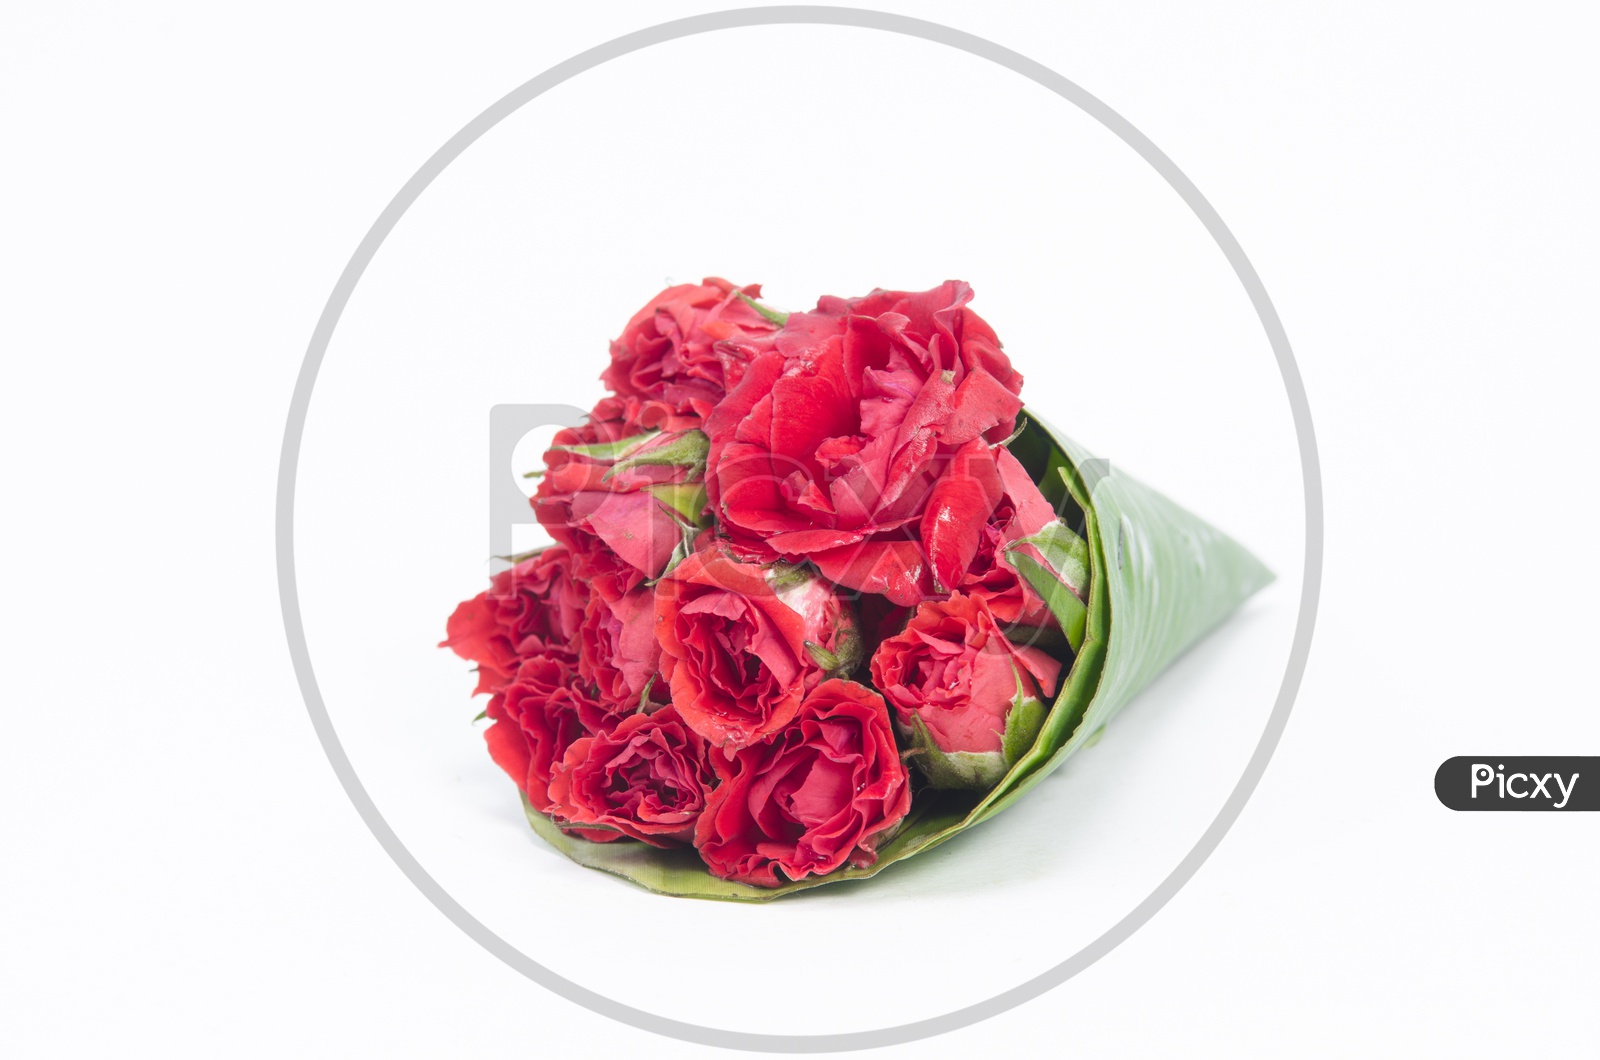 A Rose flower bouquet with Banana Leaf